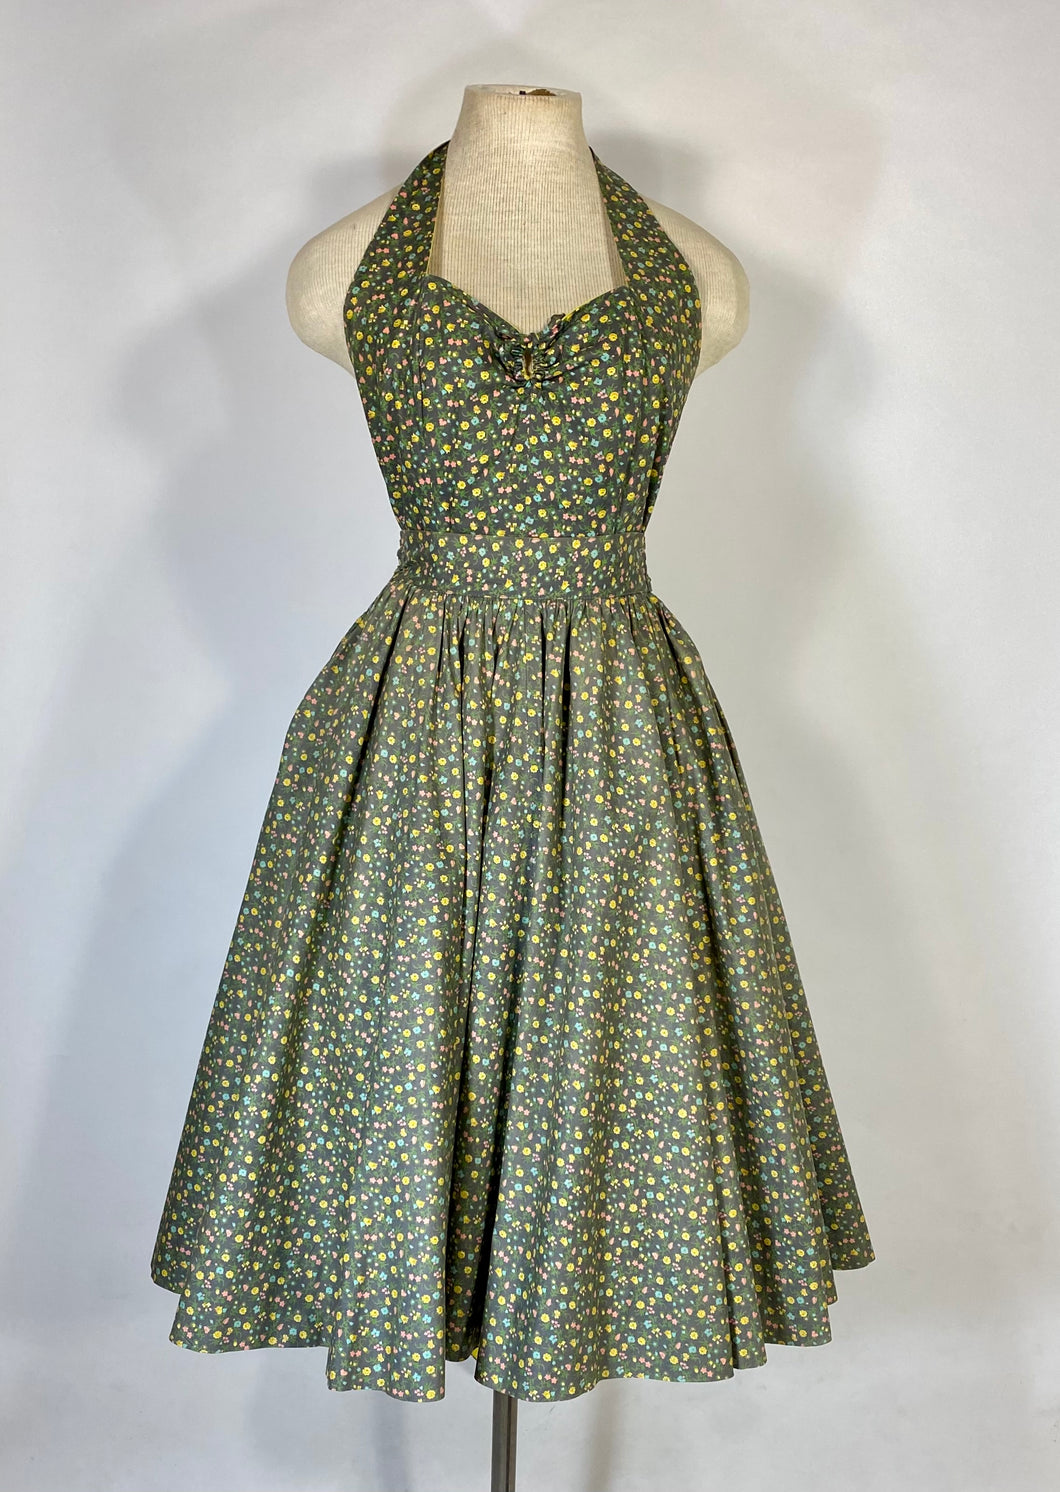 1950’s one of a kind homemade cotton ditsy print 2-pc halter top and circle skirt set